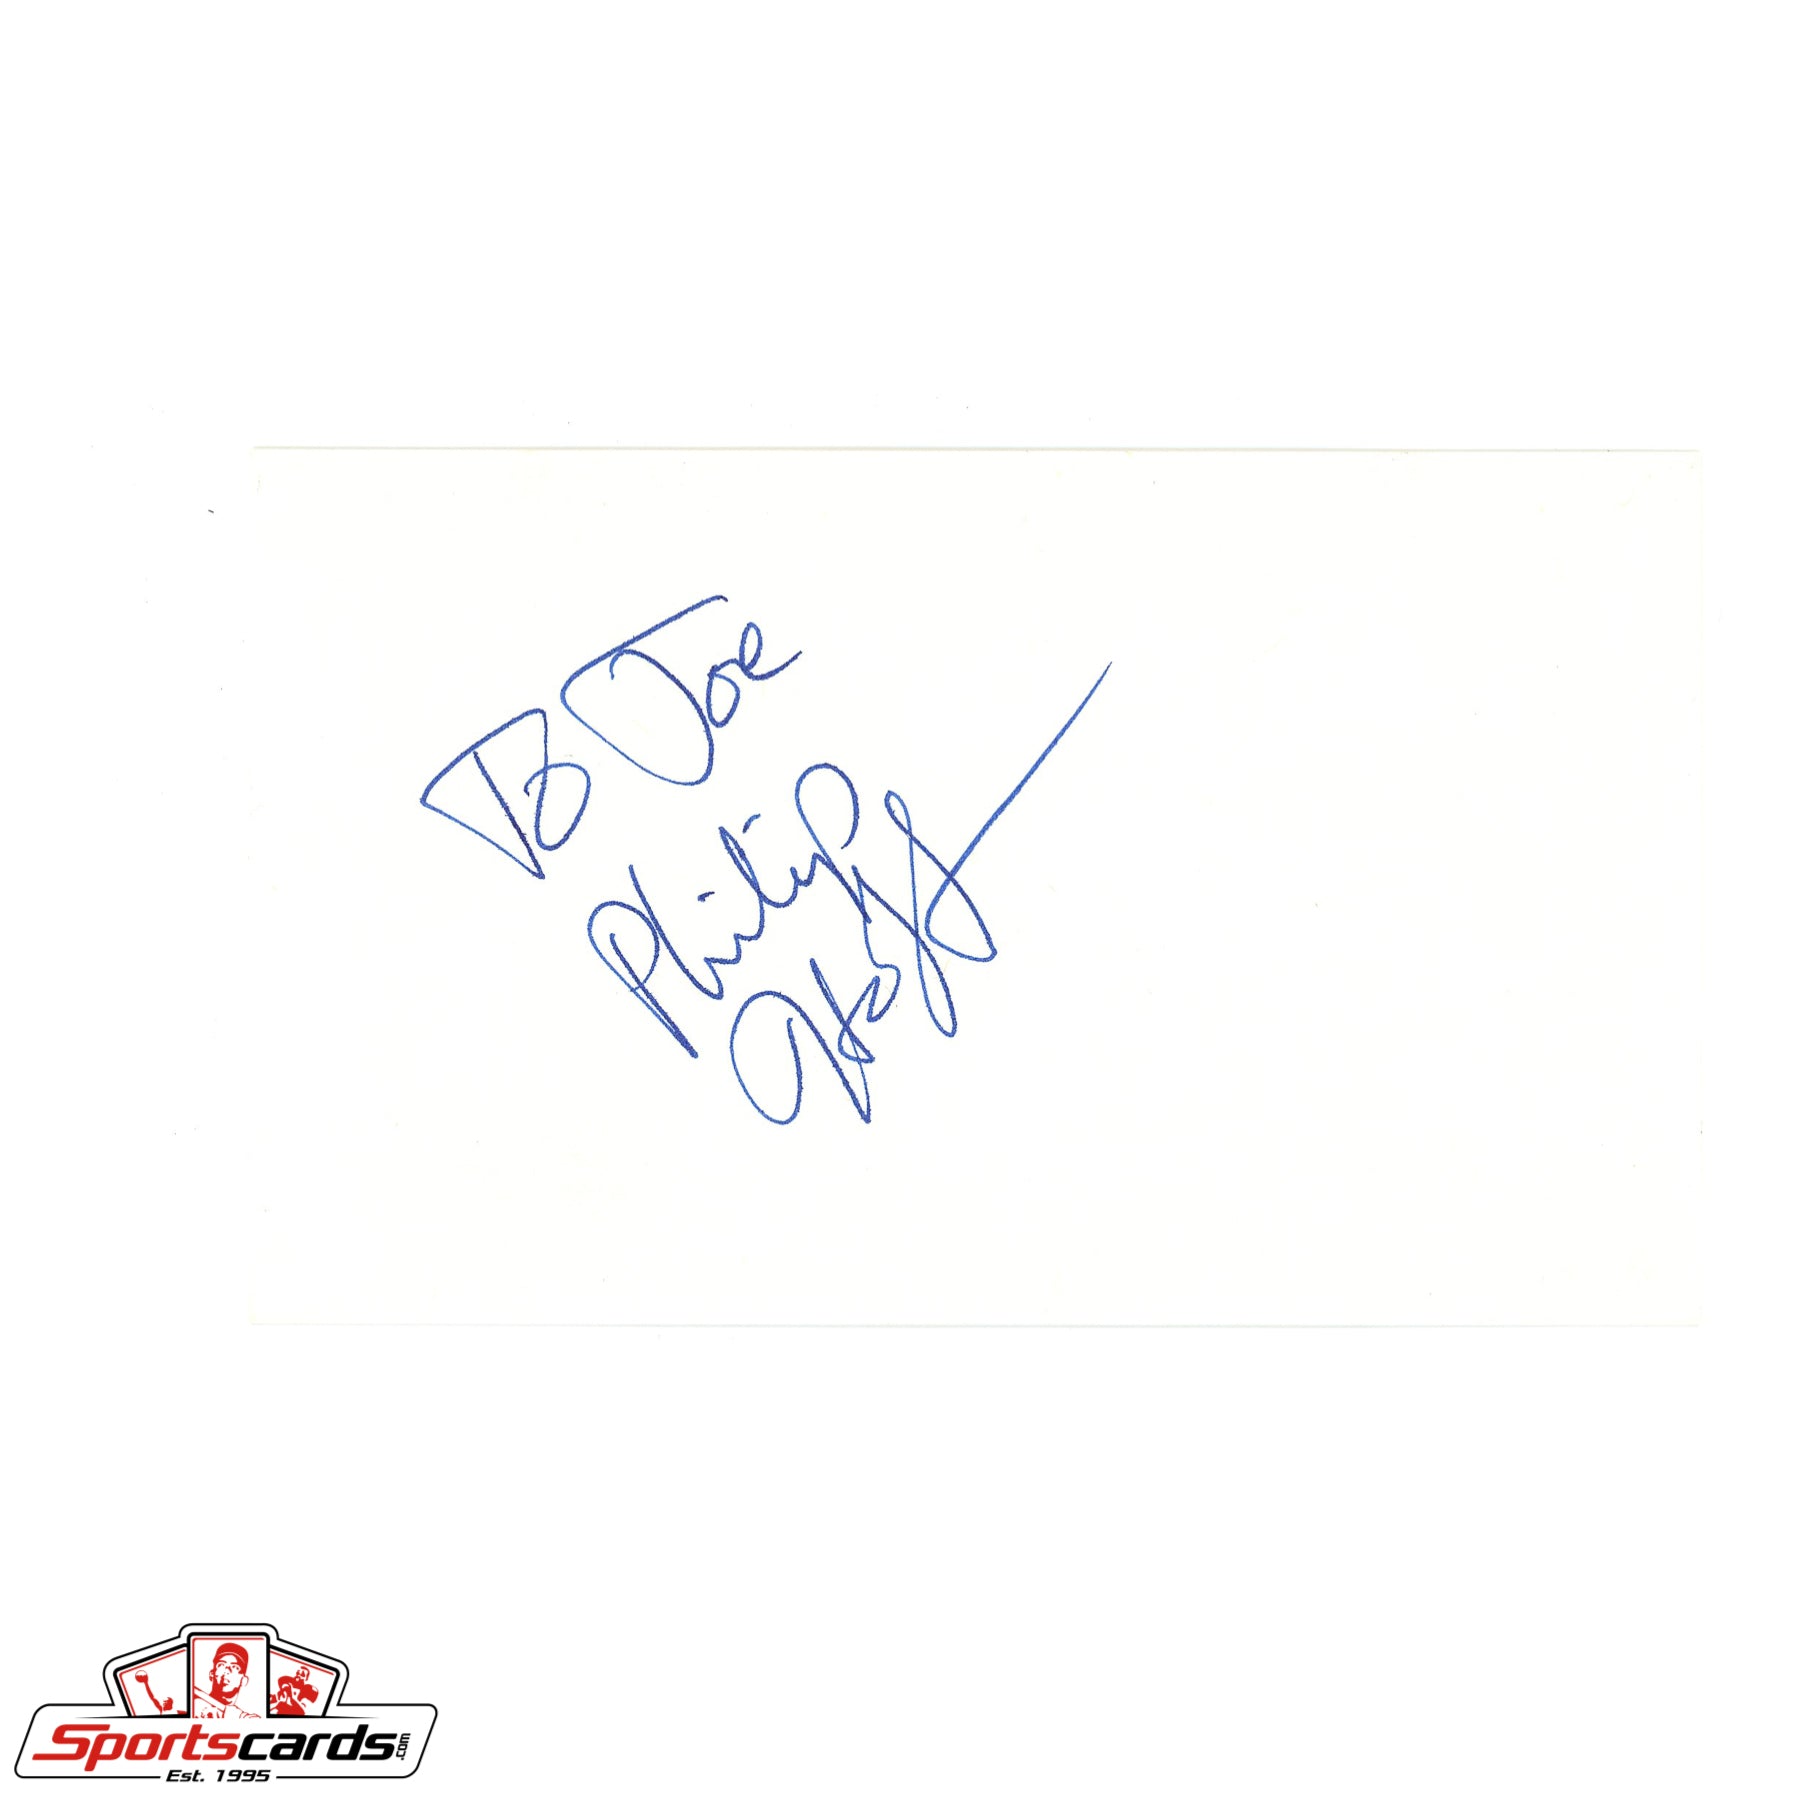 Actor Philip Seymour Hoffman Signed Auto 3x5 Index Card Beckett BAS Authentic